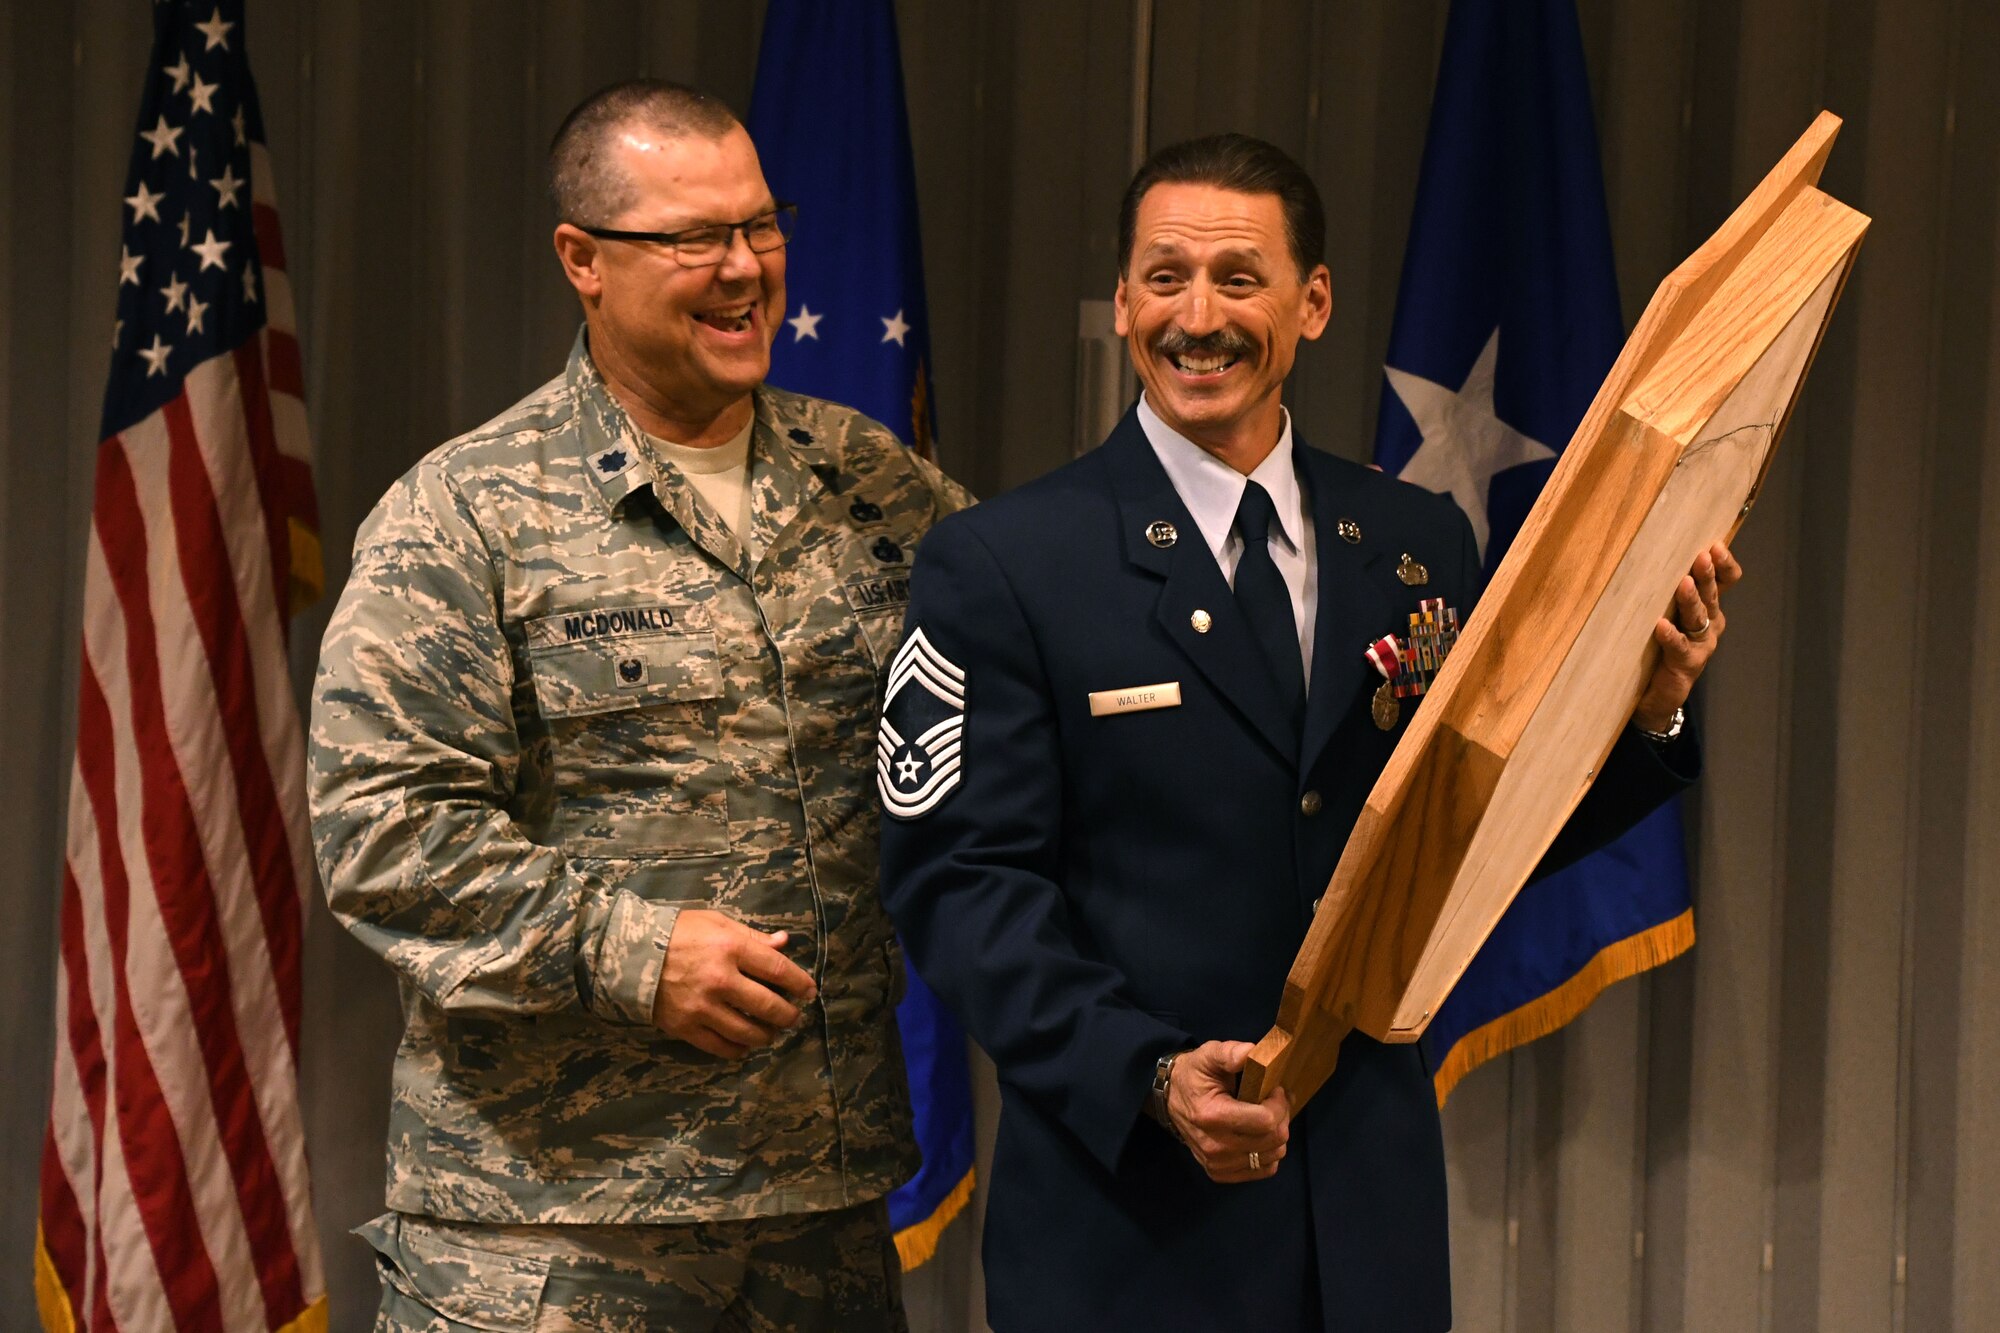 Chief Master Sgt. Robert L. Walter, 94th Force Support Squadron superintendent, smiles upon receiving a shadow box during his retirement ceremony held here July 14, 2018. Walter retired after 36 years of service in the active-duty Air Force, Air National Guard and, most recently, the Air Force Reserve. (U.S. Air Force photo/Senior Airman Josh Kincaid)